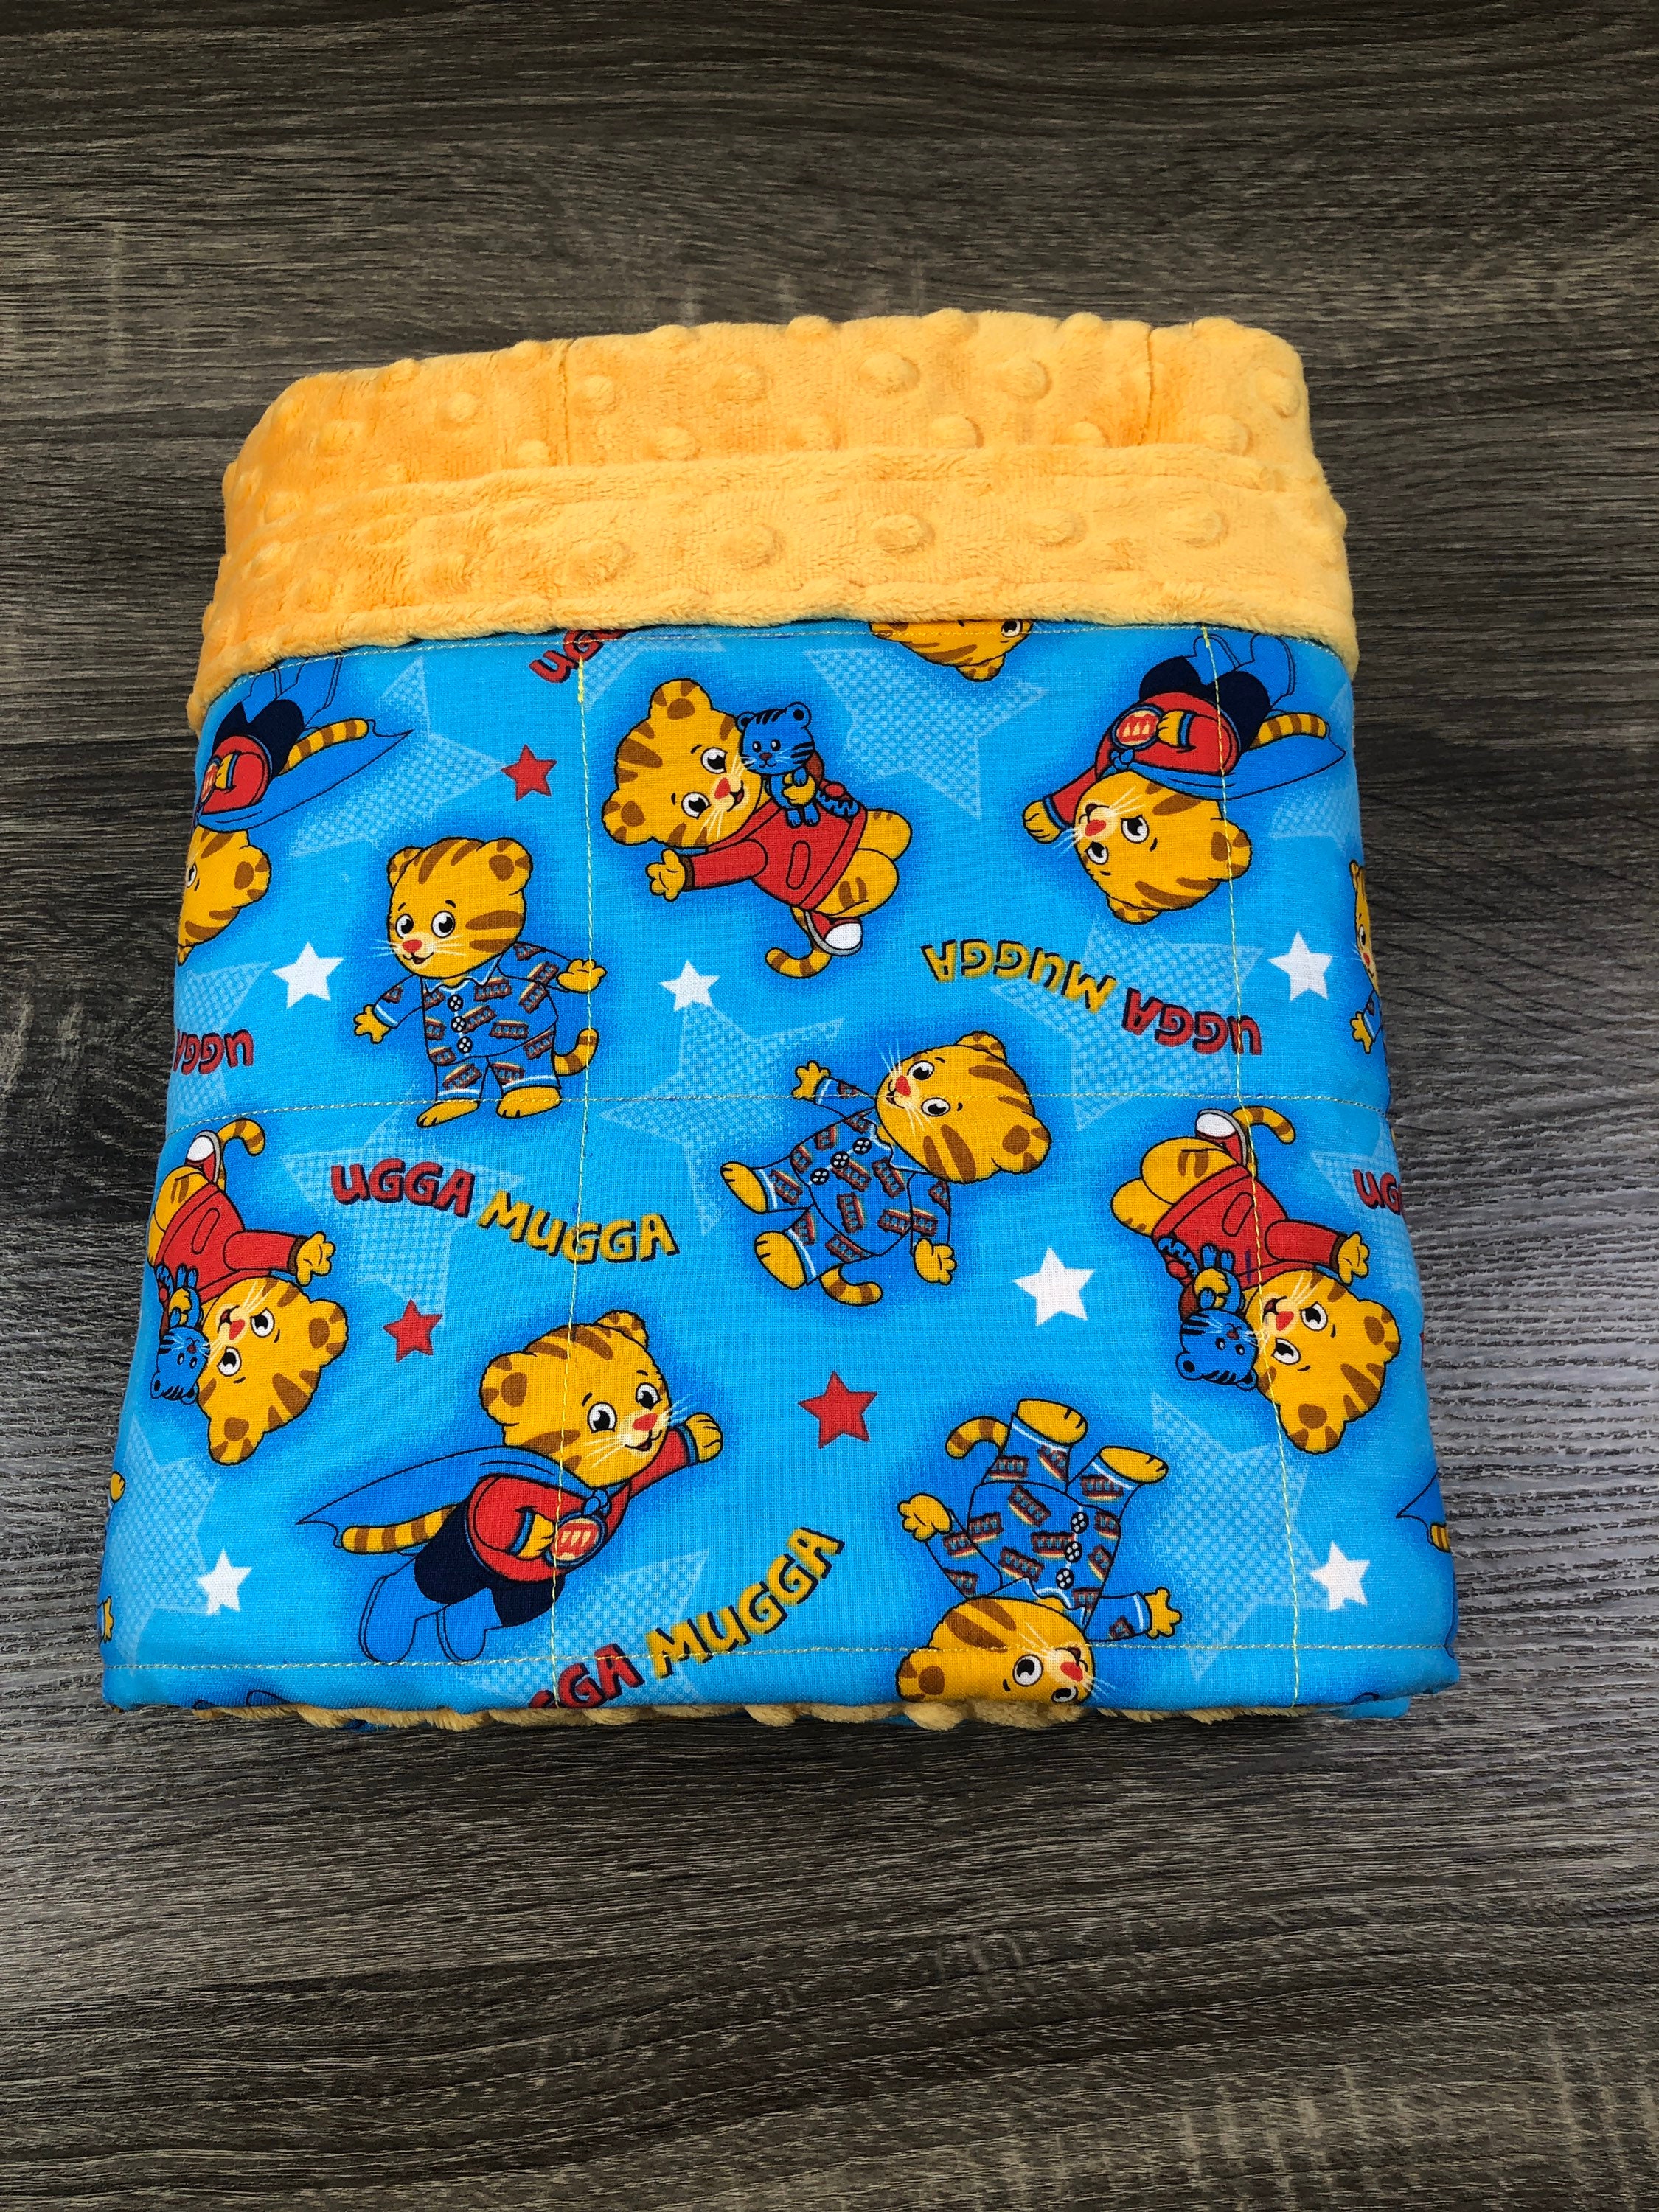 6 Pound Daniel Tiger Ready to Ship Weighted blanket, Tiger 6 pound